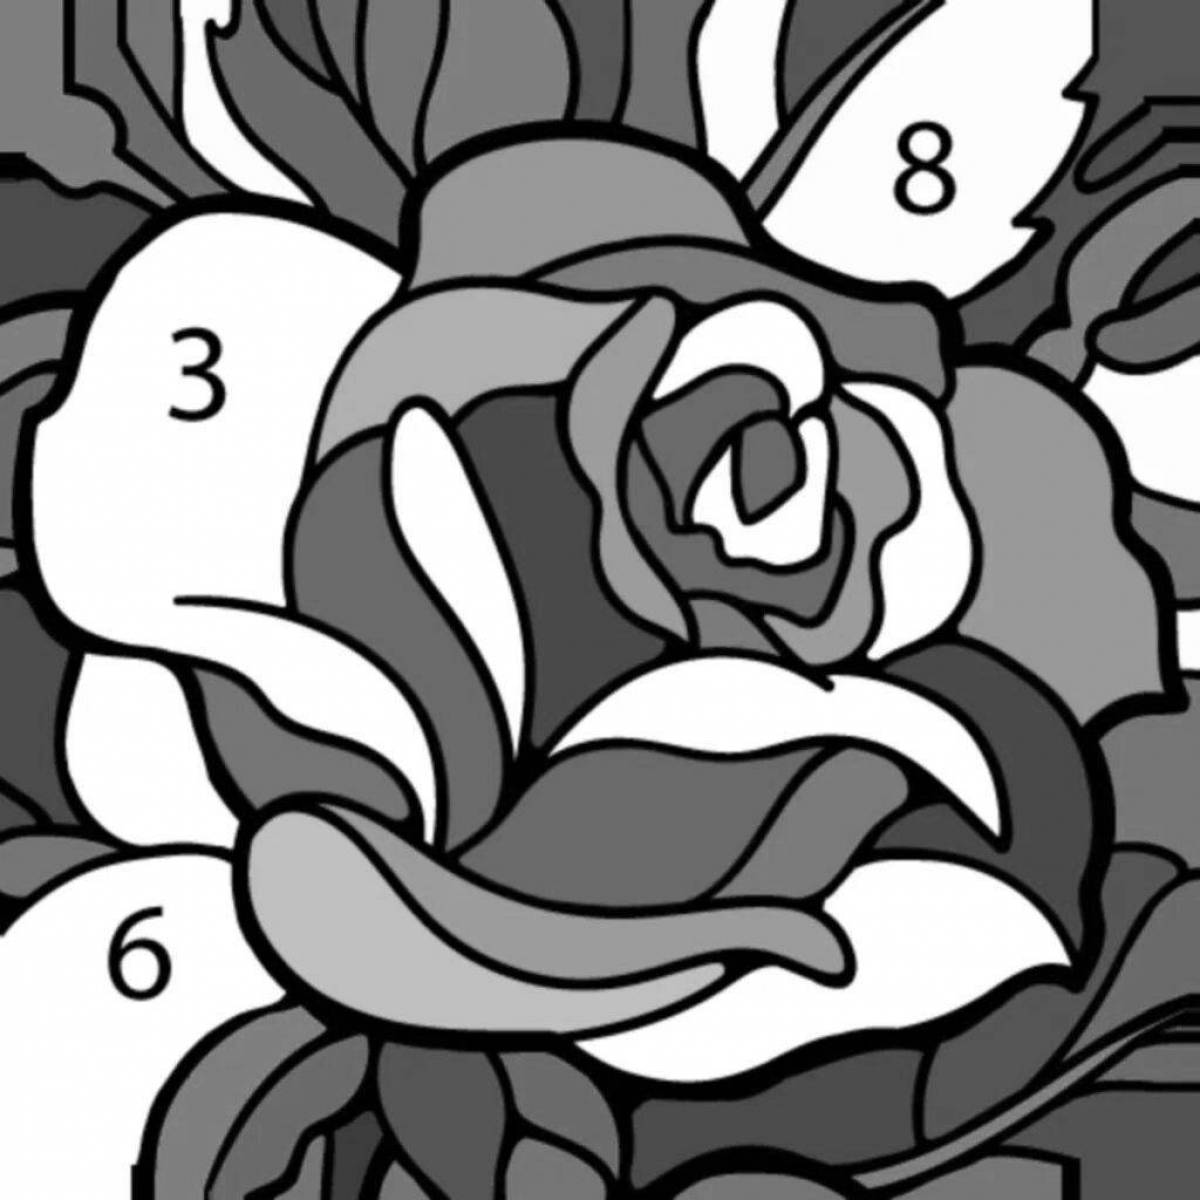 Attractive phone games by numbers coloring book